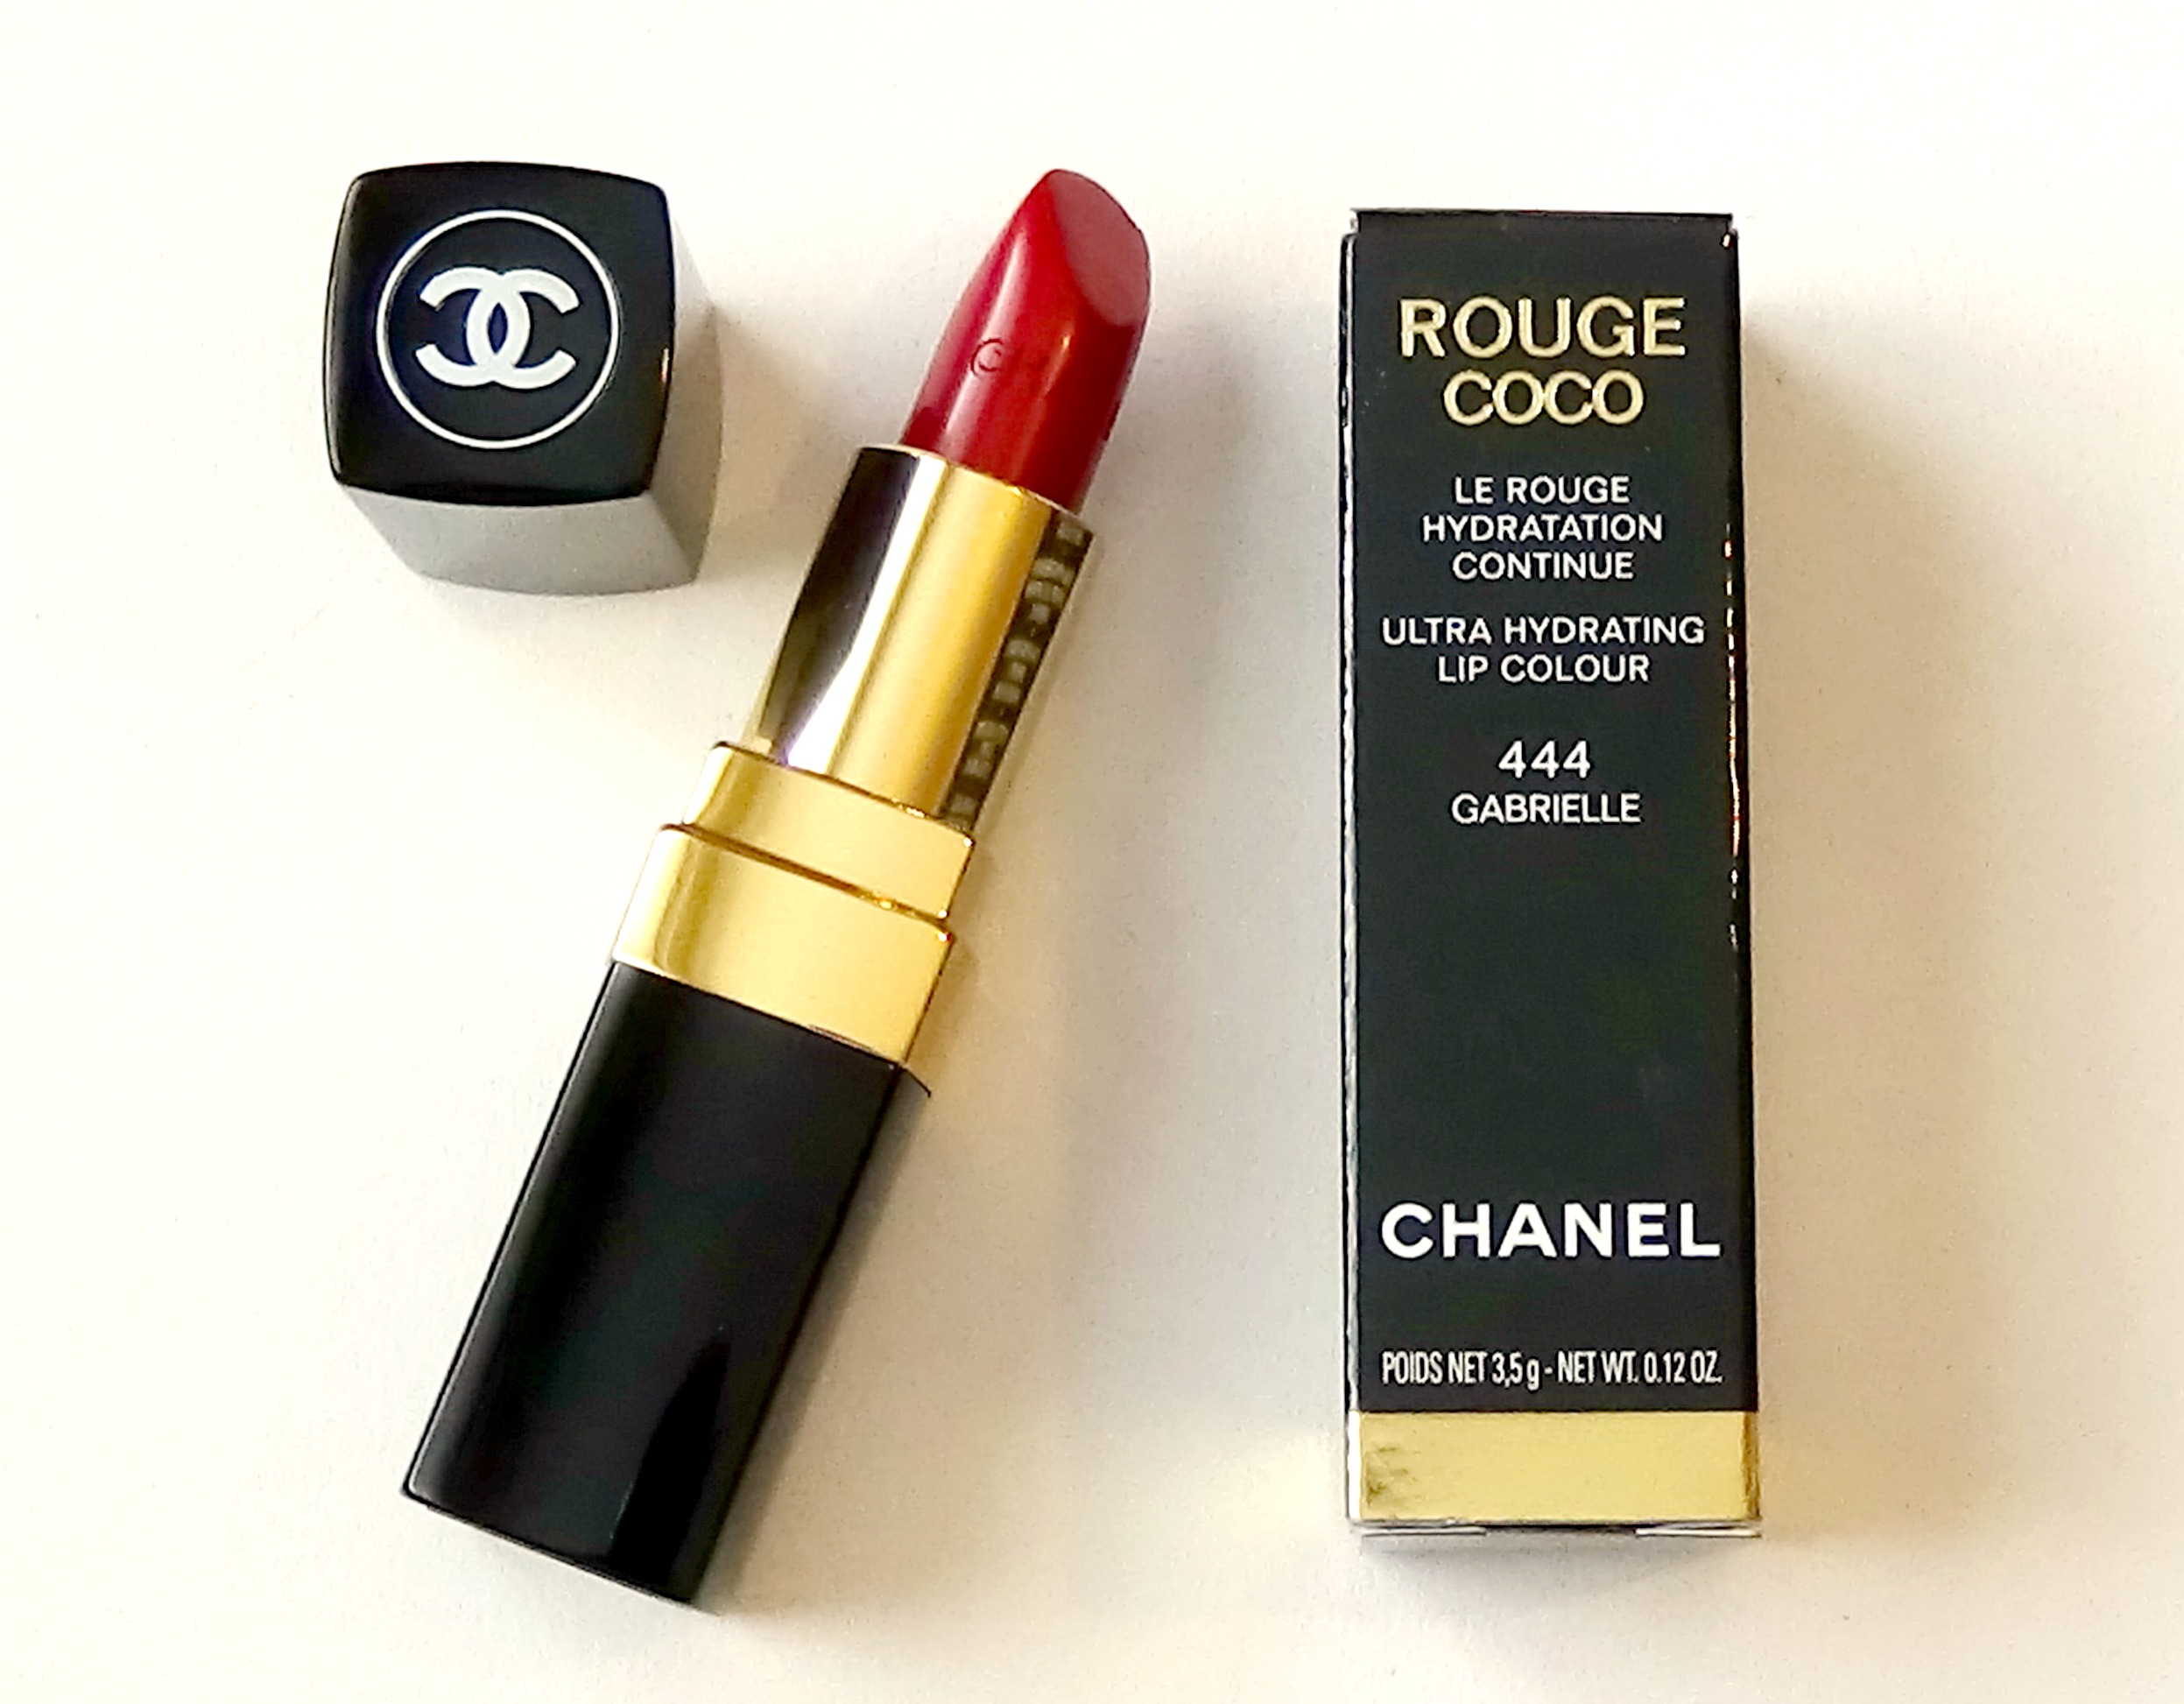 CHANEL Rouge Coco Ultra Hydrating Lip Colour 444 Gabrielle for